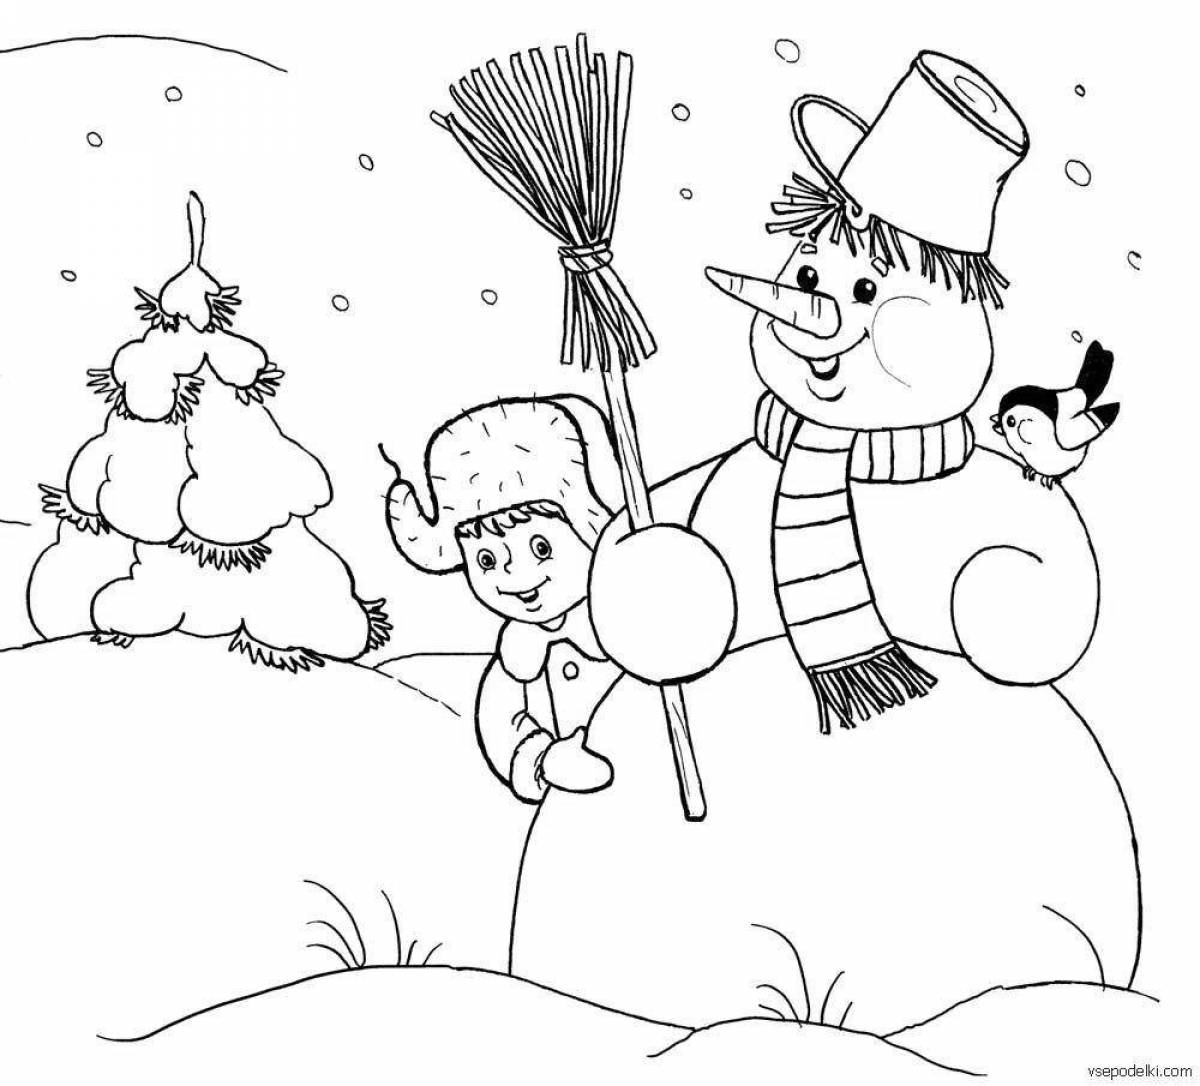 Funny snowball coloring for kids